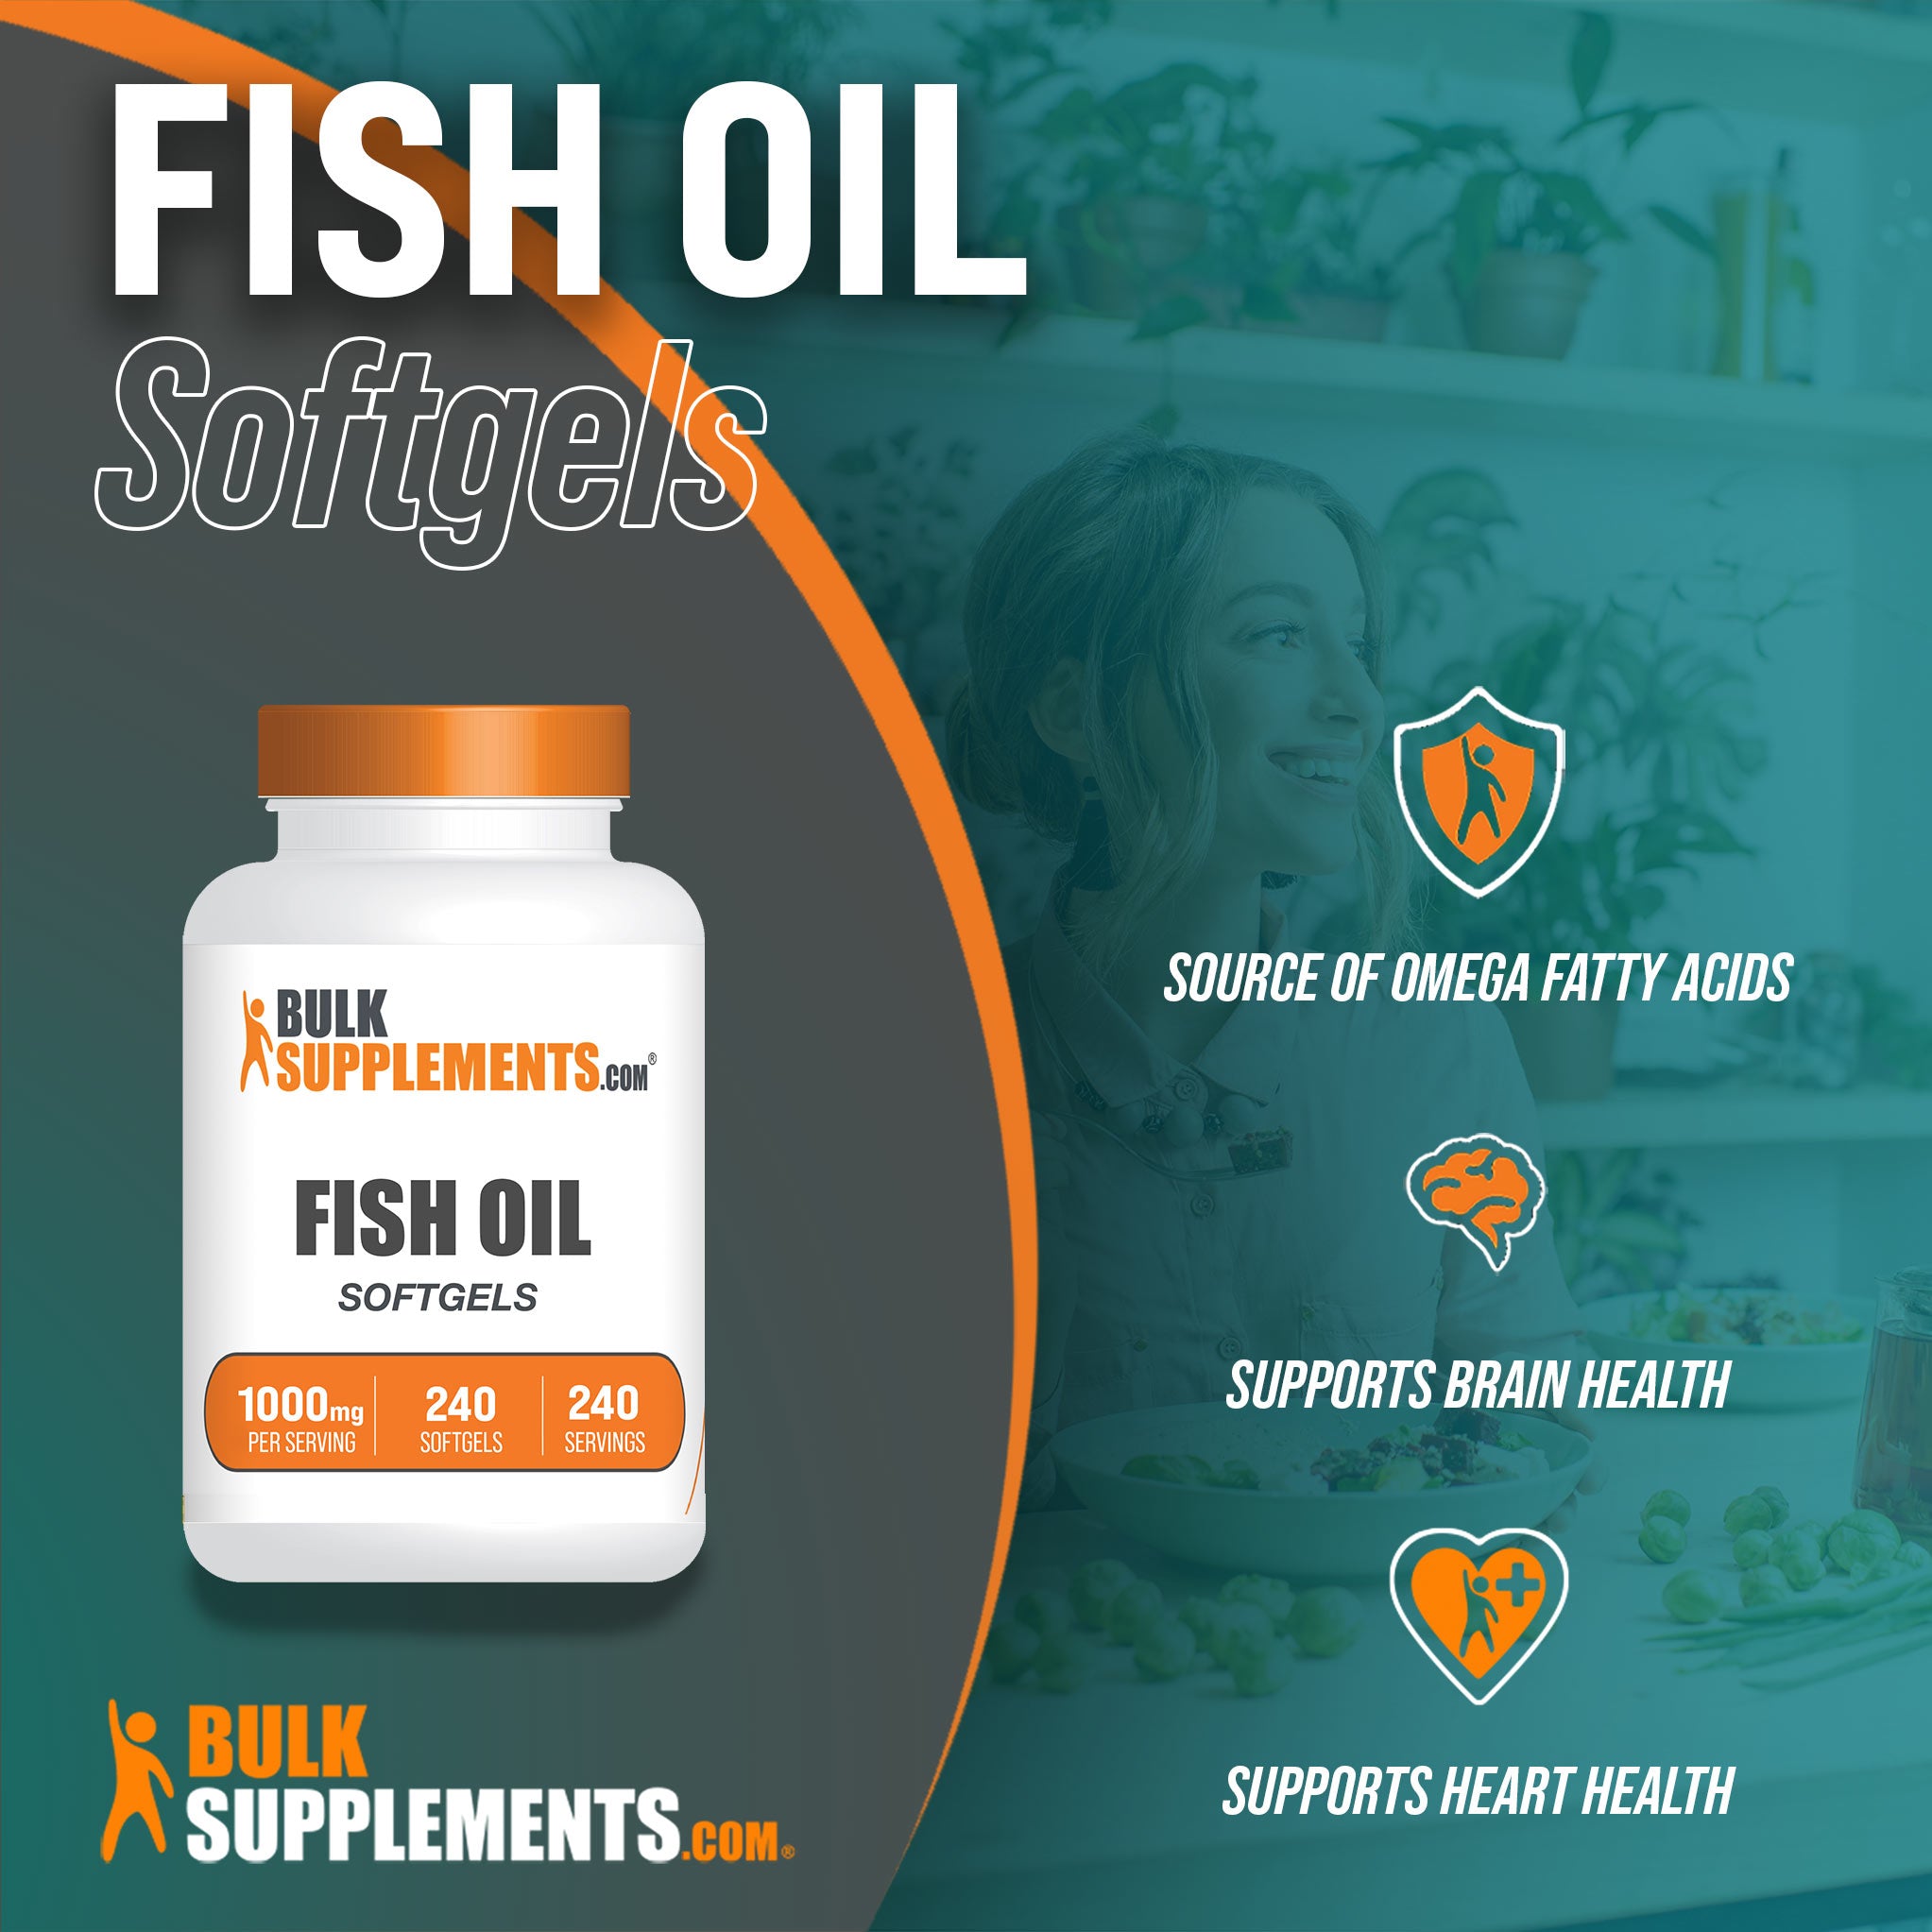 Benefits of Fish Oil Softgels; source of omega fatty acids, supports brain health, supports heart health